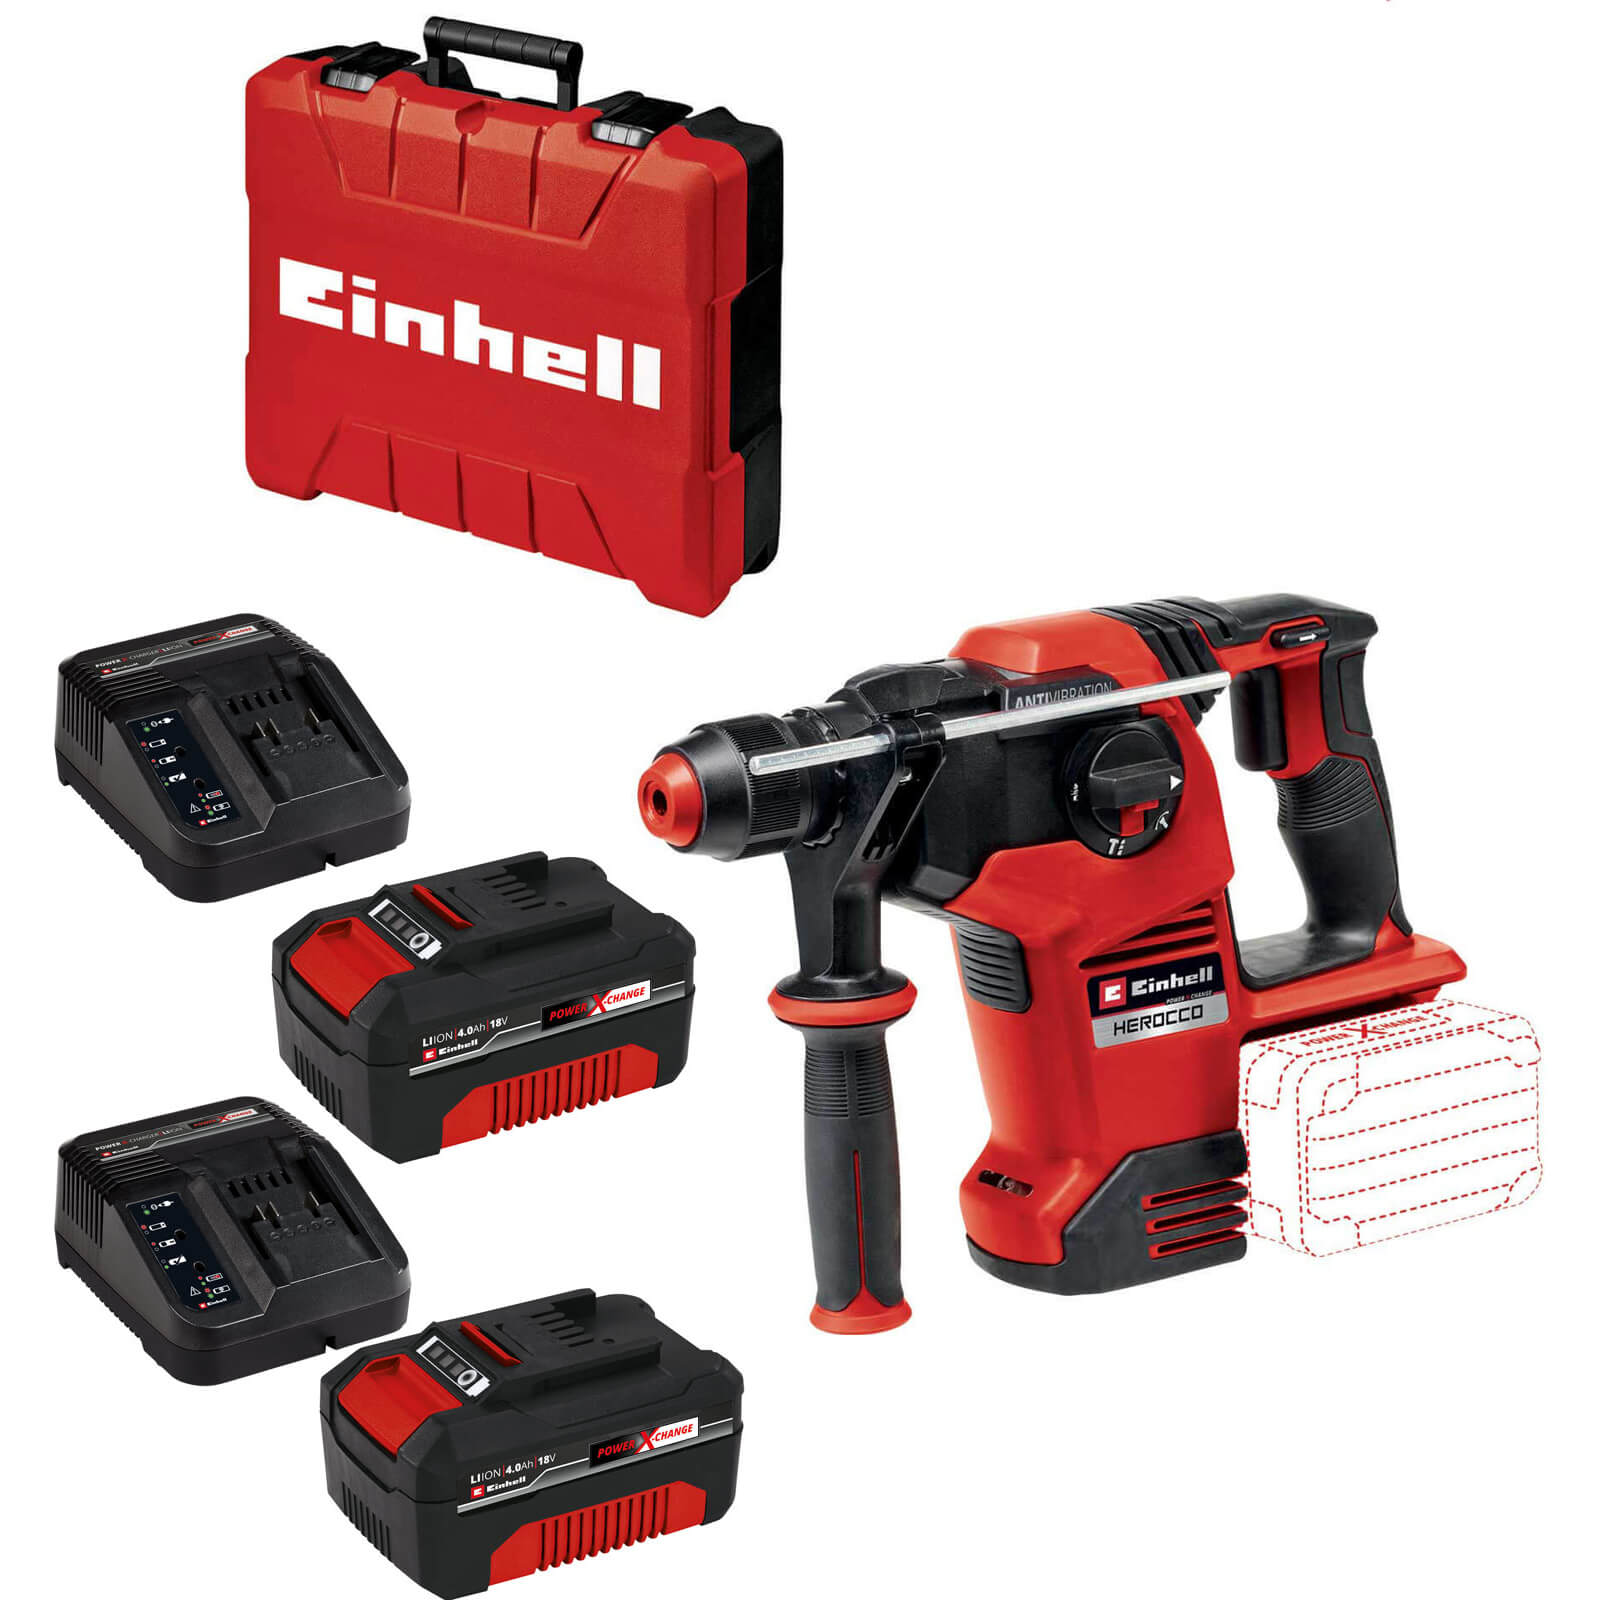 Einhell HEROCCO 36/28 36v Cordless Brushless SDS Plus Rotary Hammer Drill 2 x 4ah Li-ion Charger Case